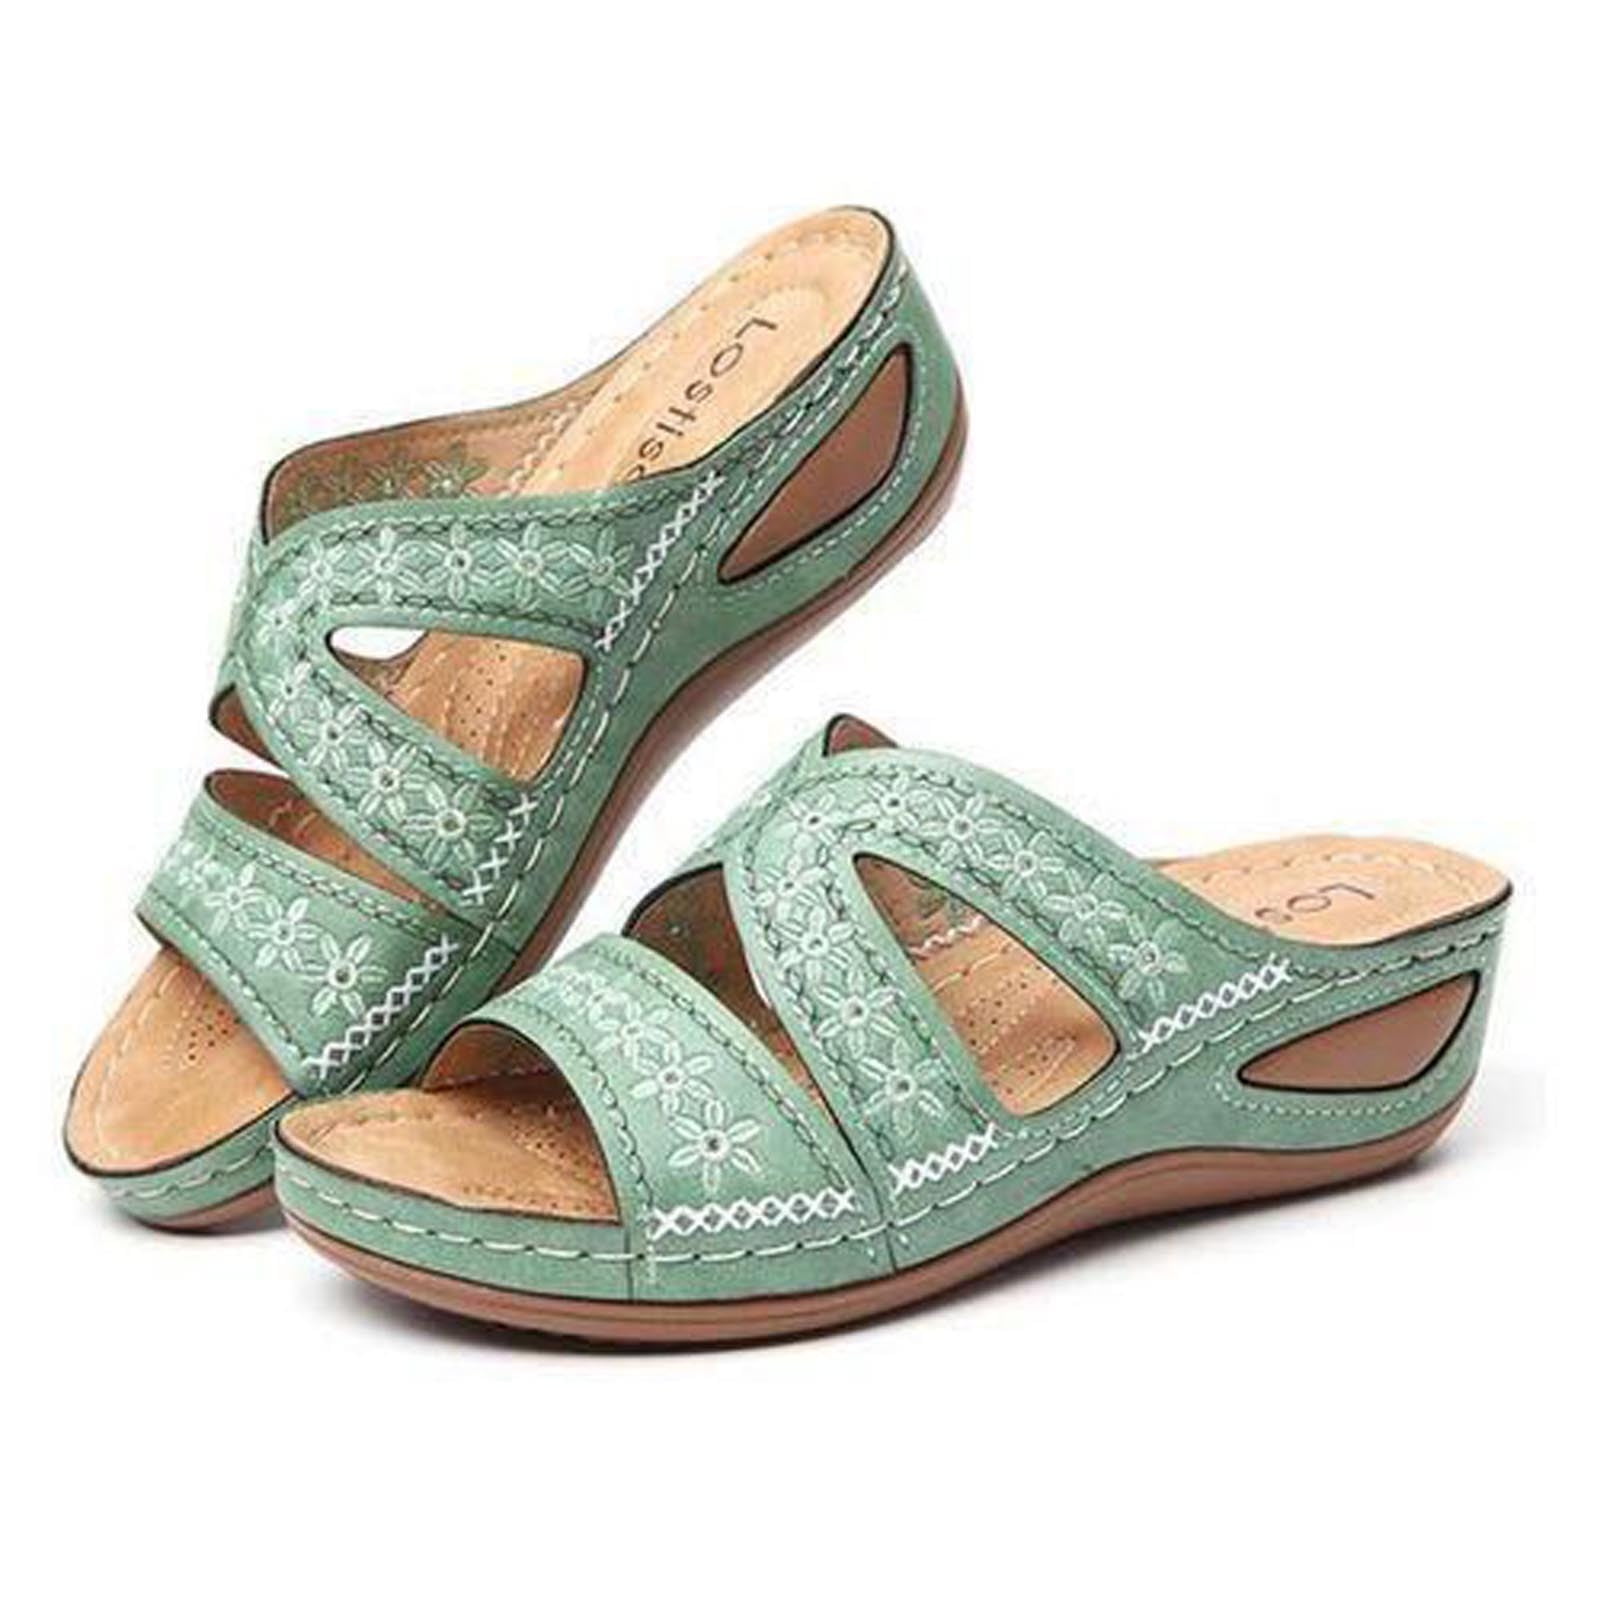 LoyisViDion Womens Sandals Clearance Women'S Multi-Color Embroidered ...